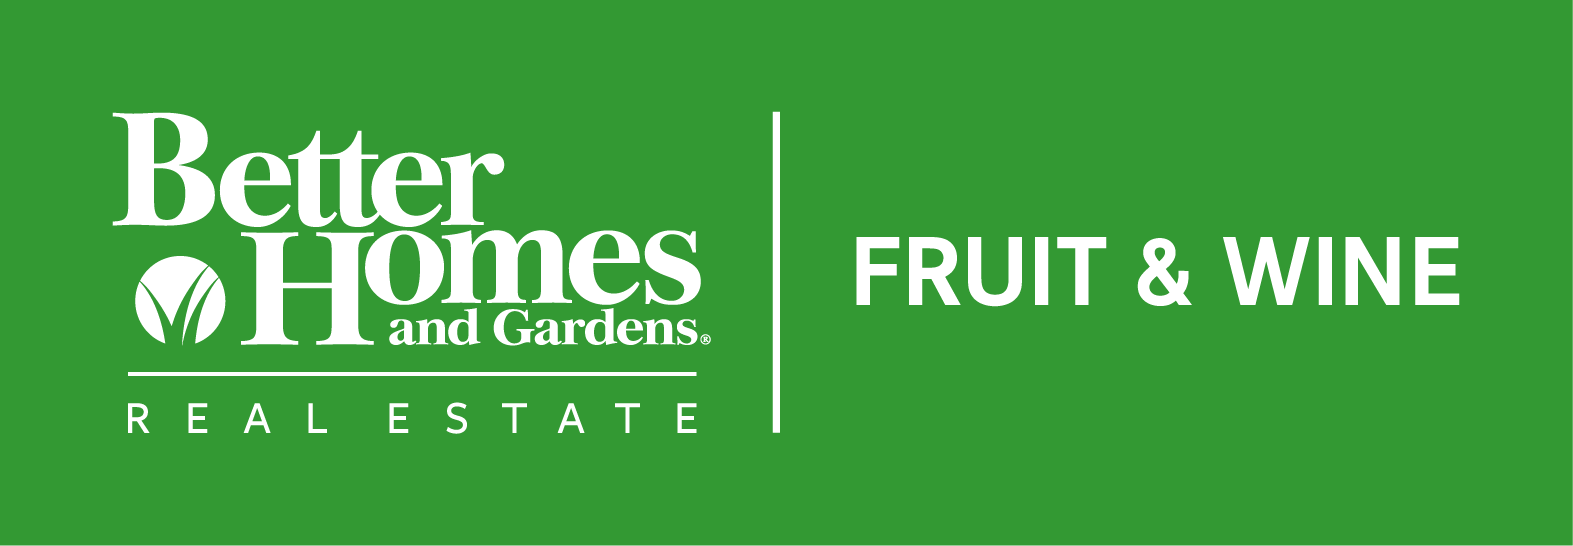 Better Homes & Garderns Real Estate | Fruit and Wine